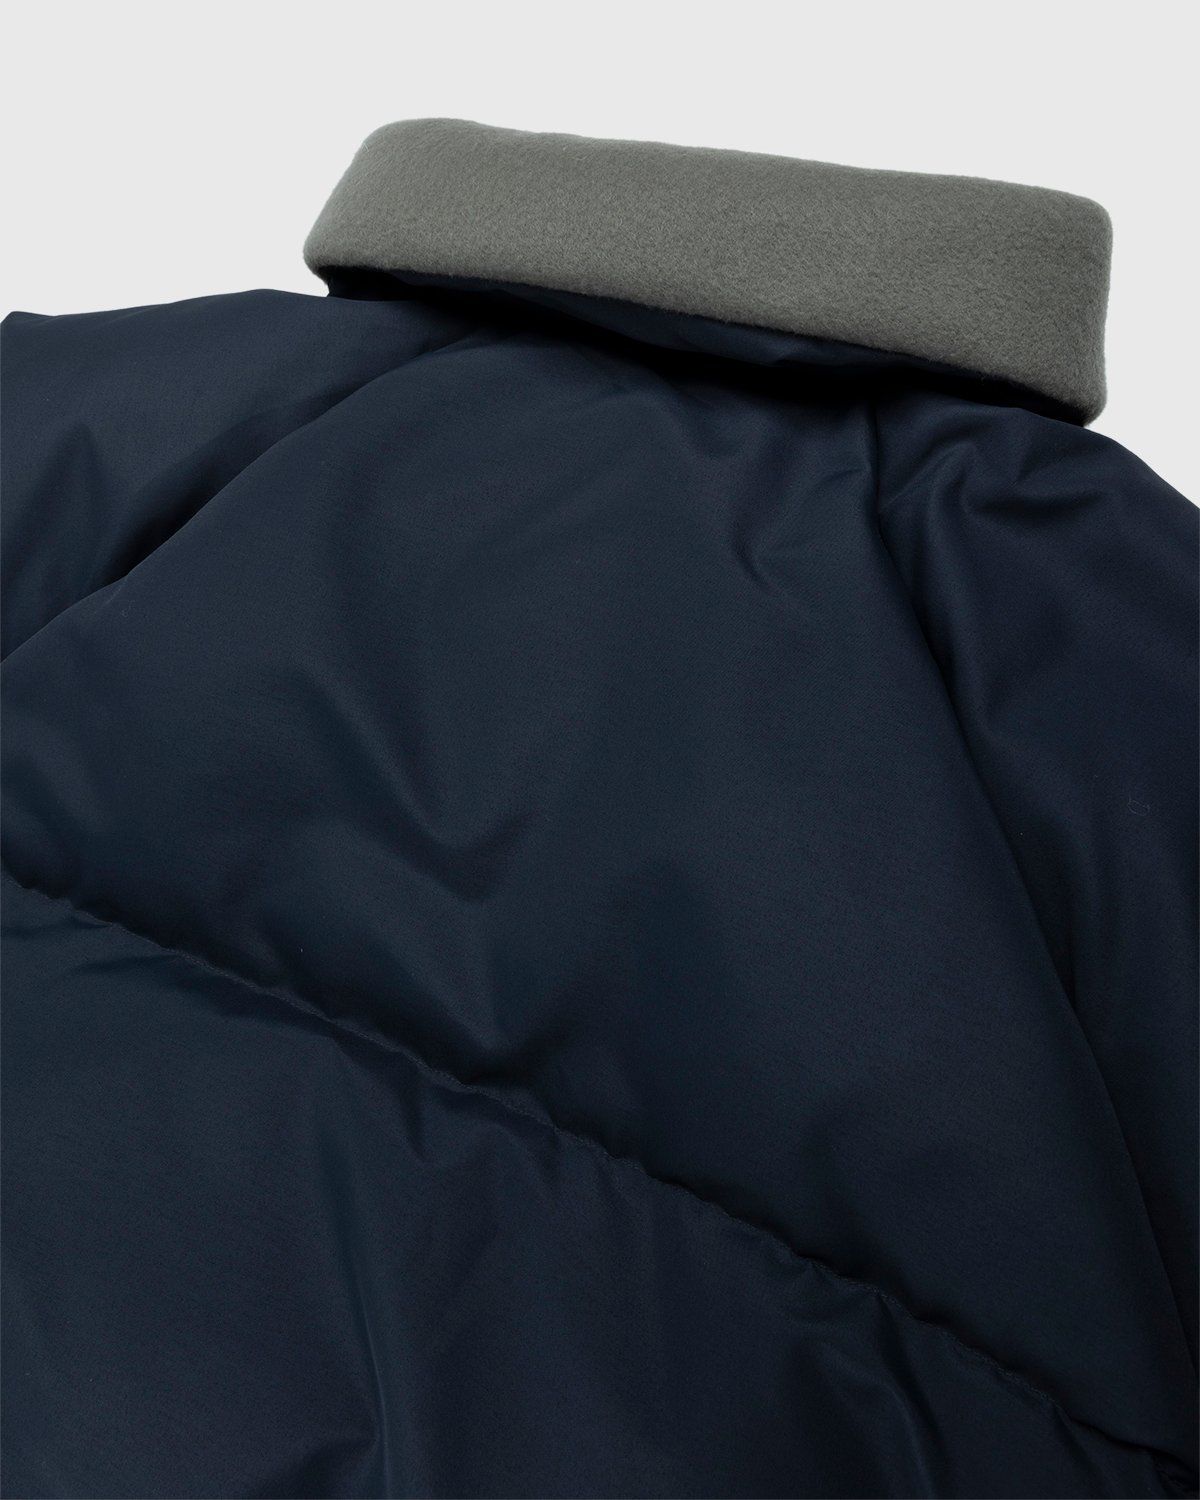 Acne Studios – Down Puffer Jacket Charcoal Grey - Image 9